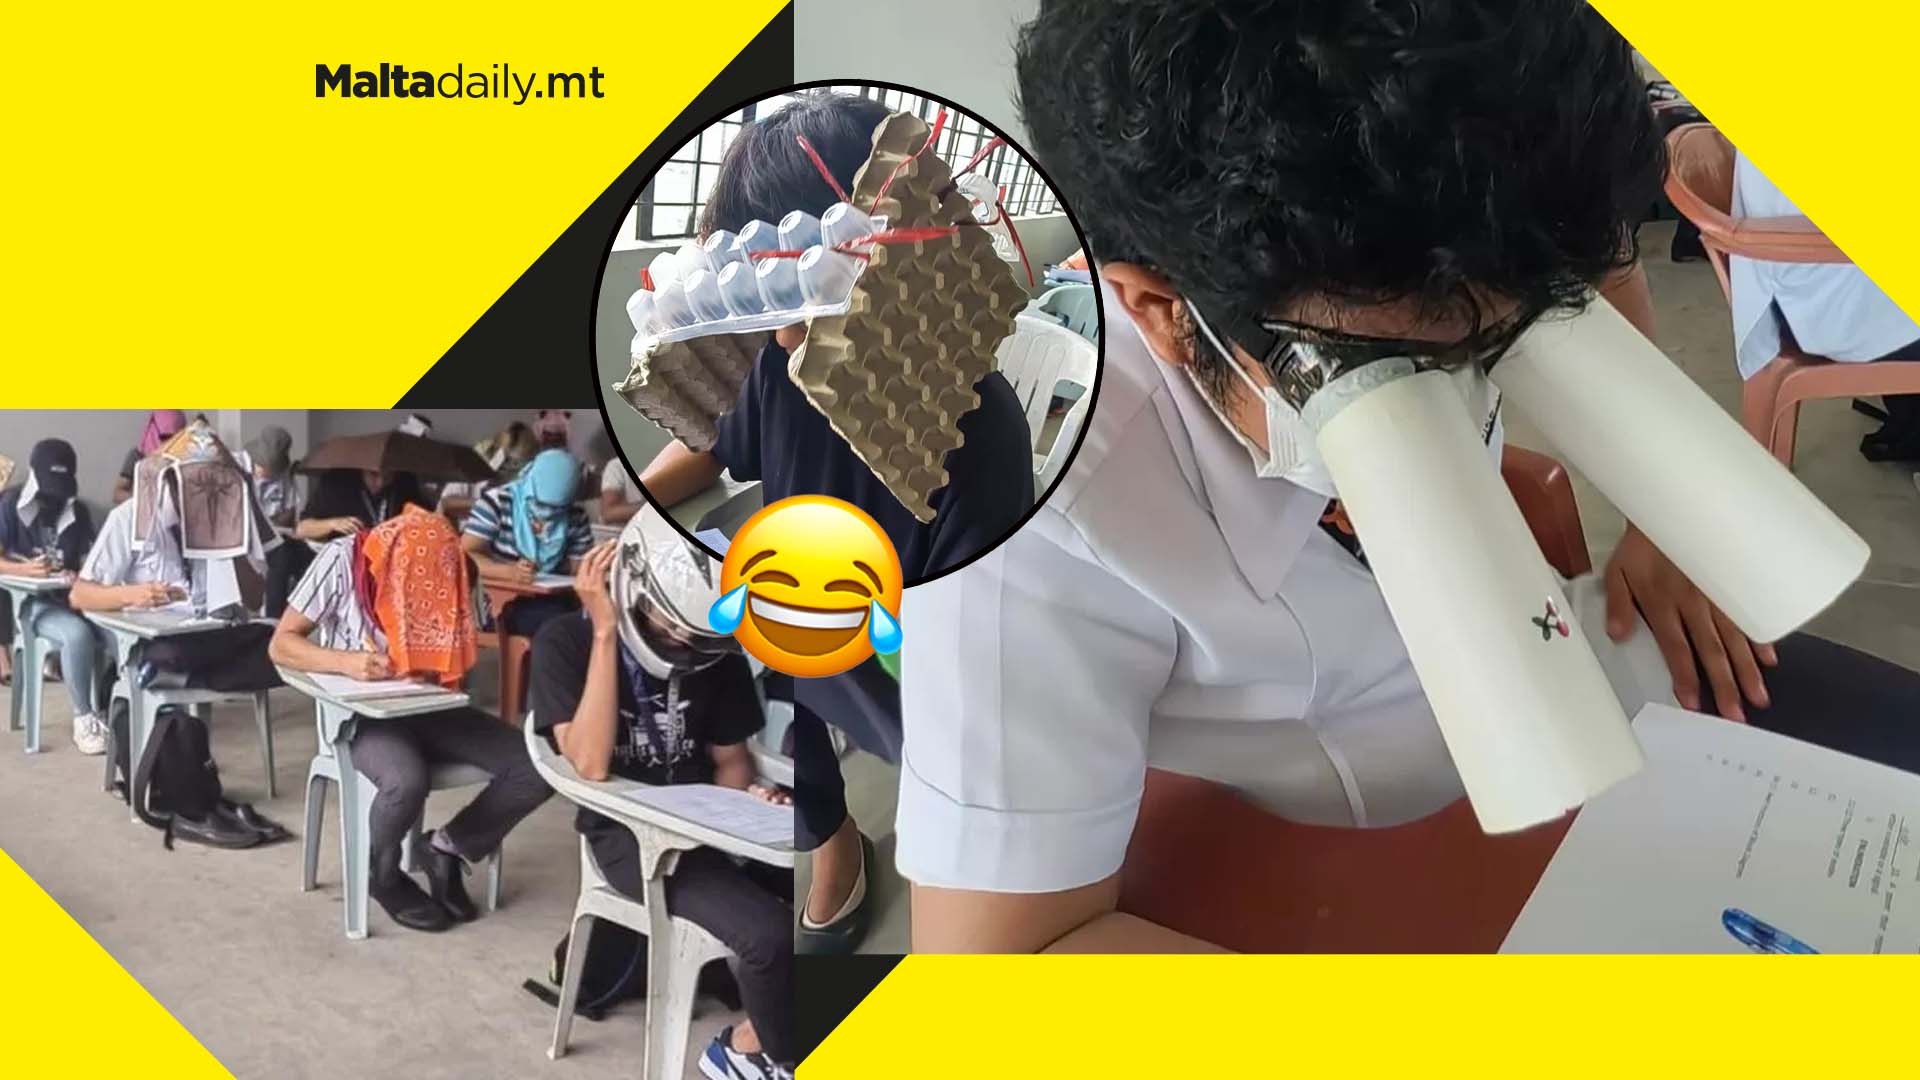 Anti-cheating hats: students wearing creative hats during exams go viral